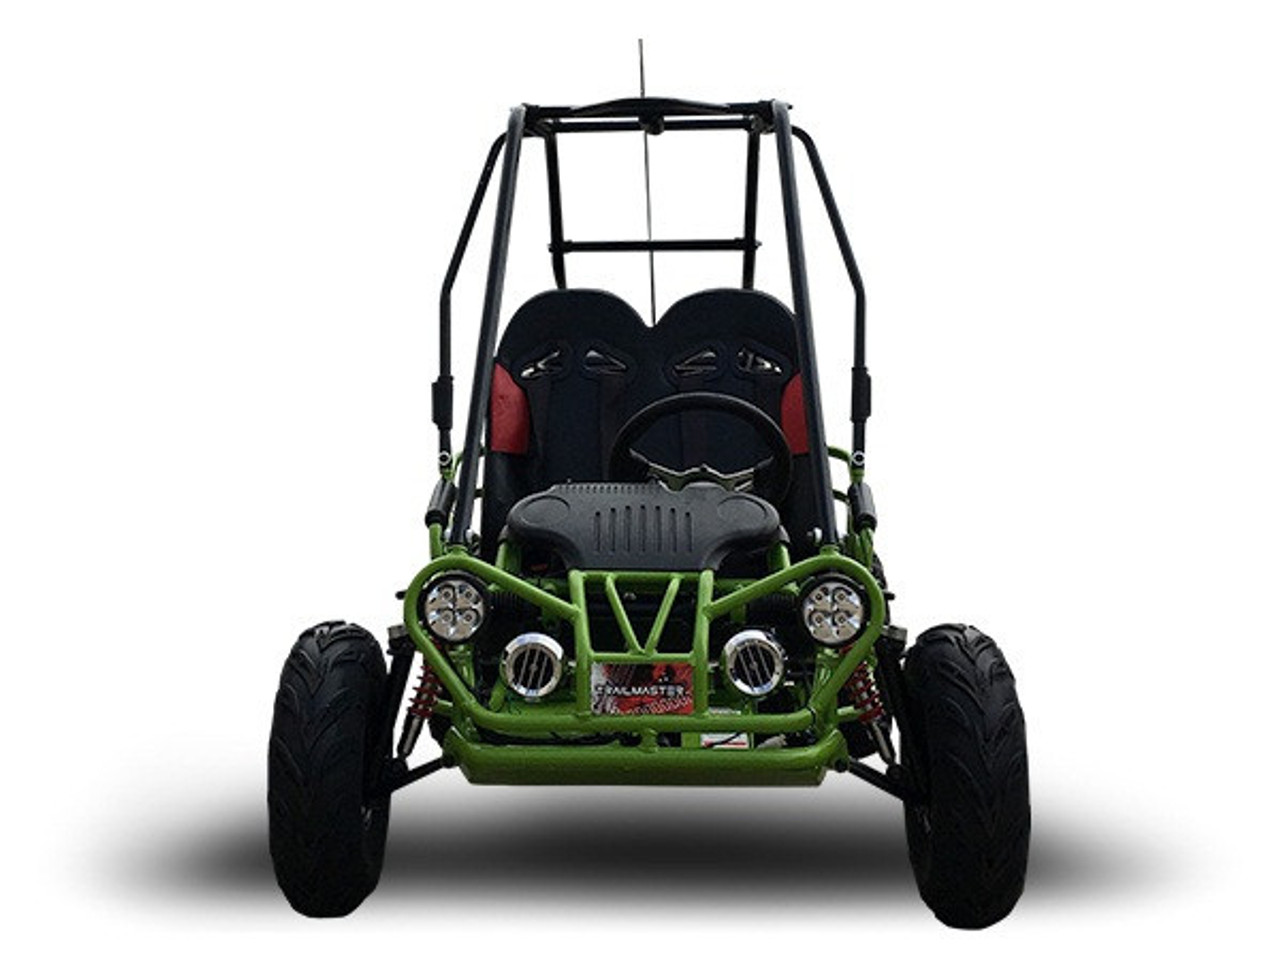 TrailMaster Mini XRX/R+ (Plus) Assembled version Upgraded Go Kart with Bigger Tires, Frame, Wider Seat - FRONT GREEN